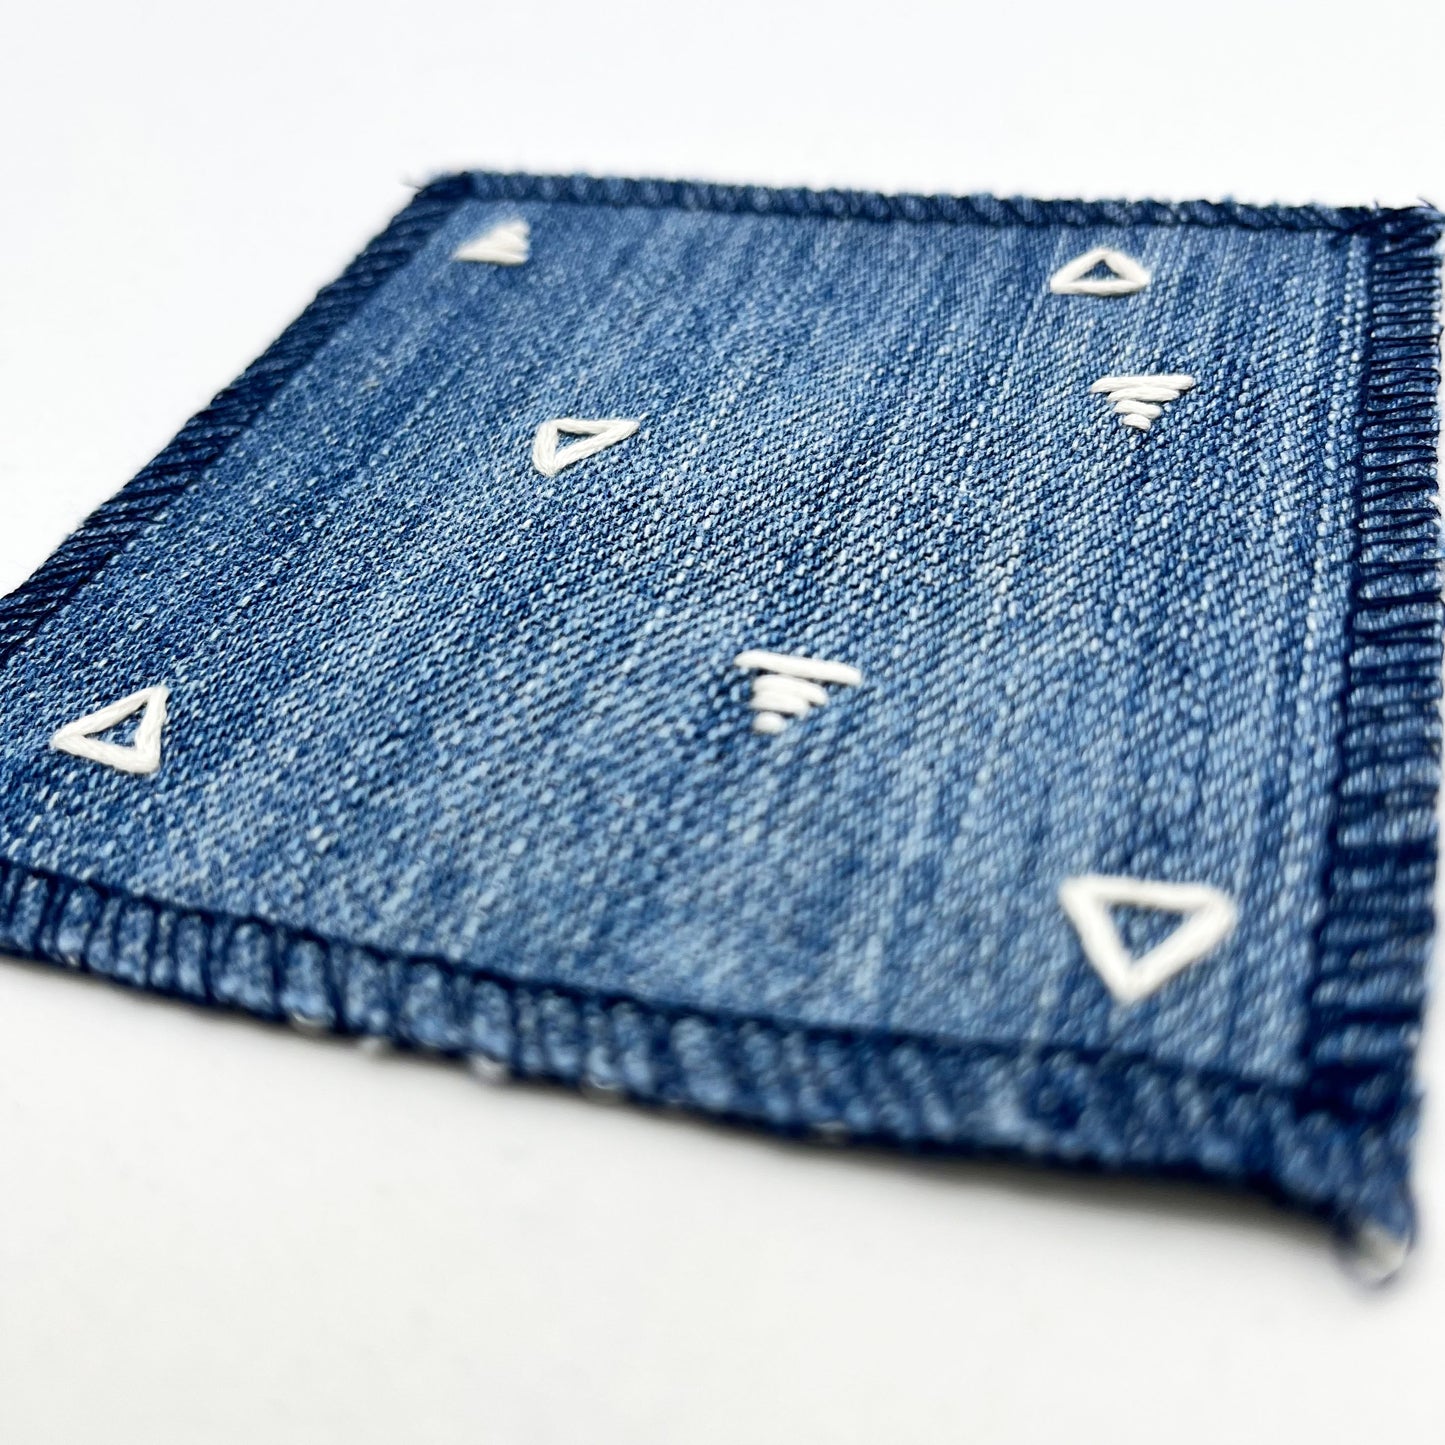 an angled close up view of a square patch made out of denim, handstitched with scattered ivory triangles, some as outlines some with a line fill, with overlocked edges, on a white background